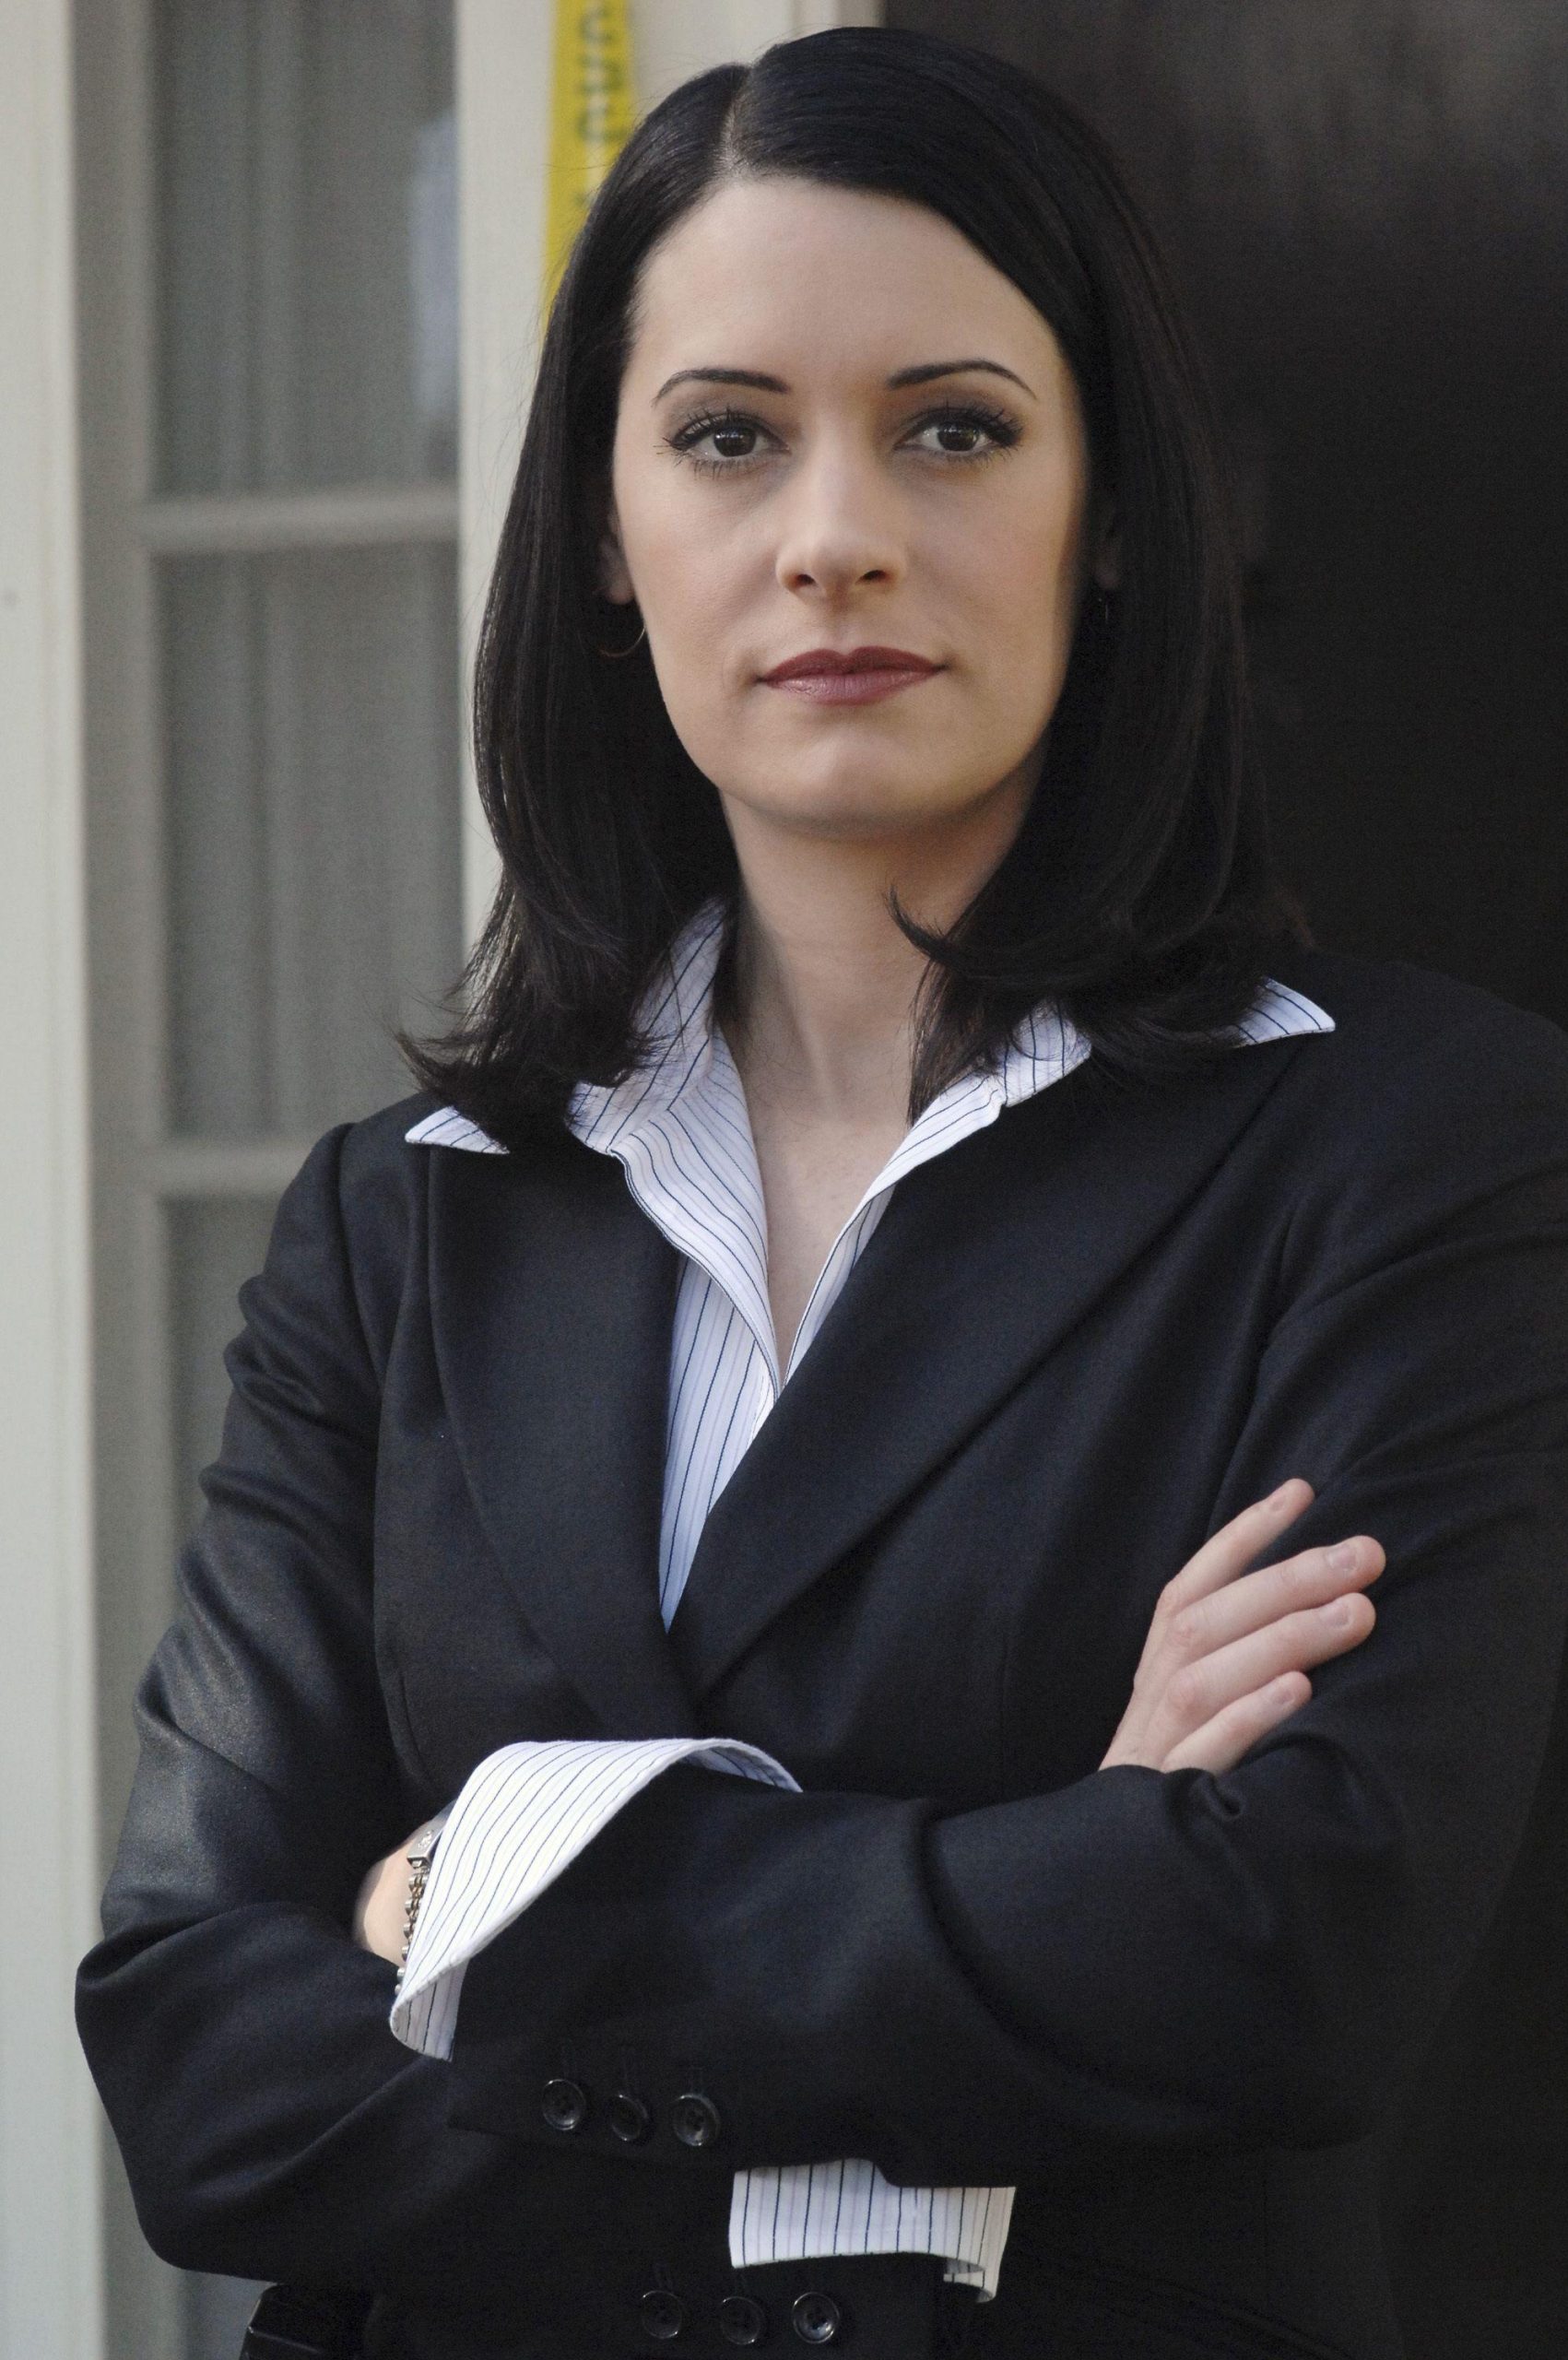 70+ Hot Pictures Of Paget Brewster From Criminal Minds Will Brighten Up Your Day 145